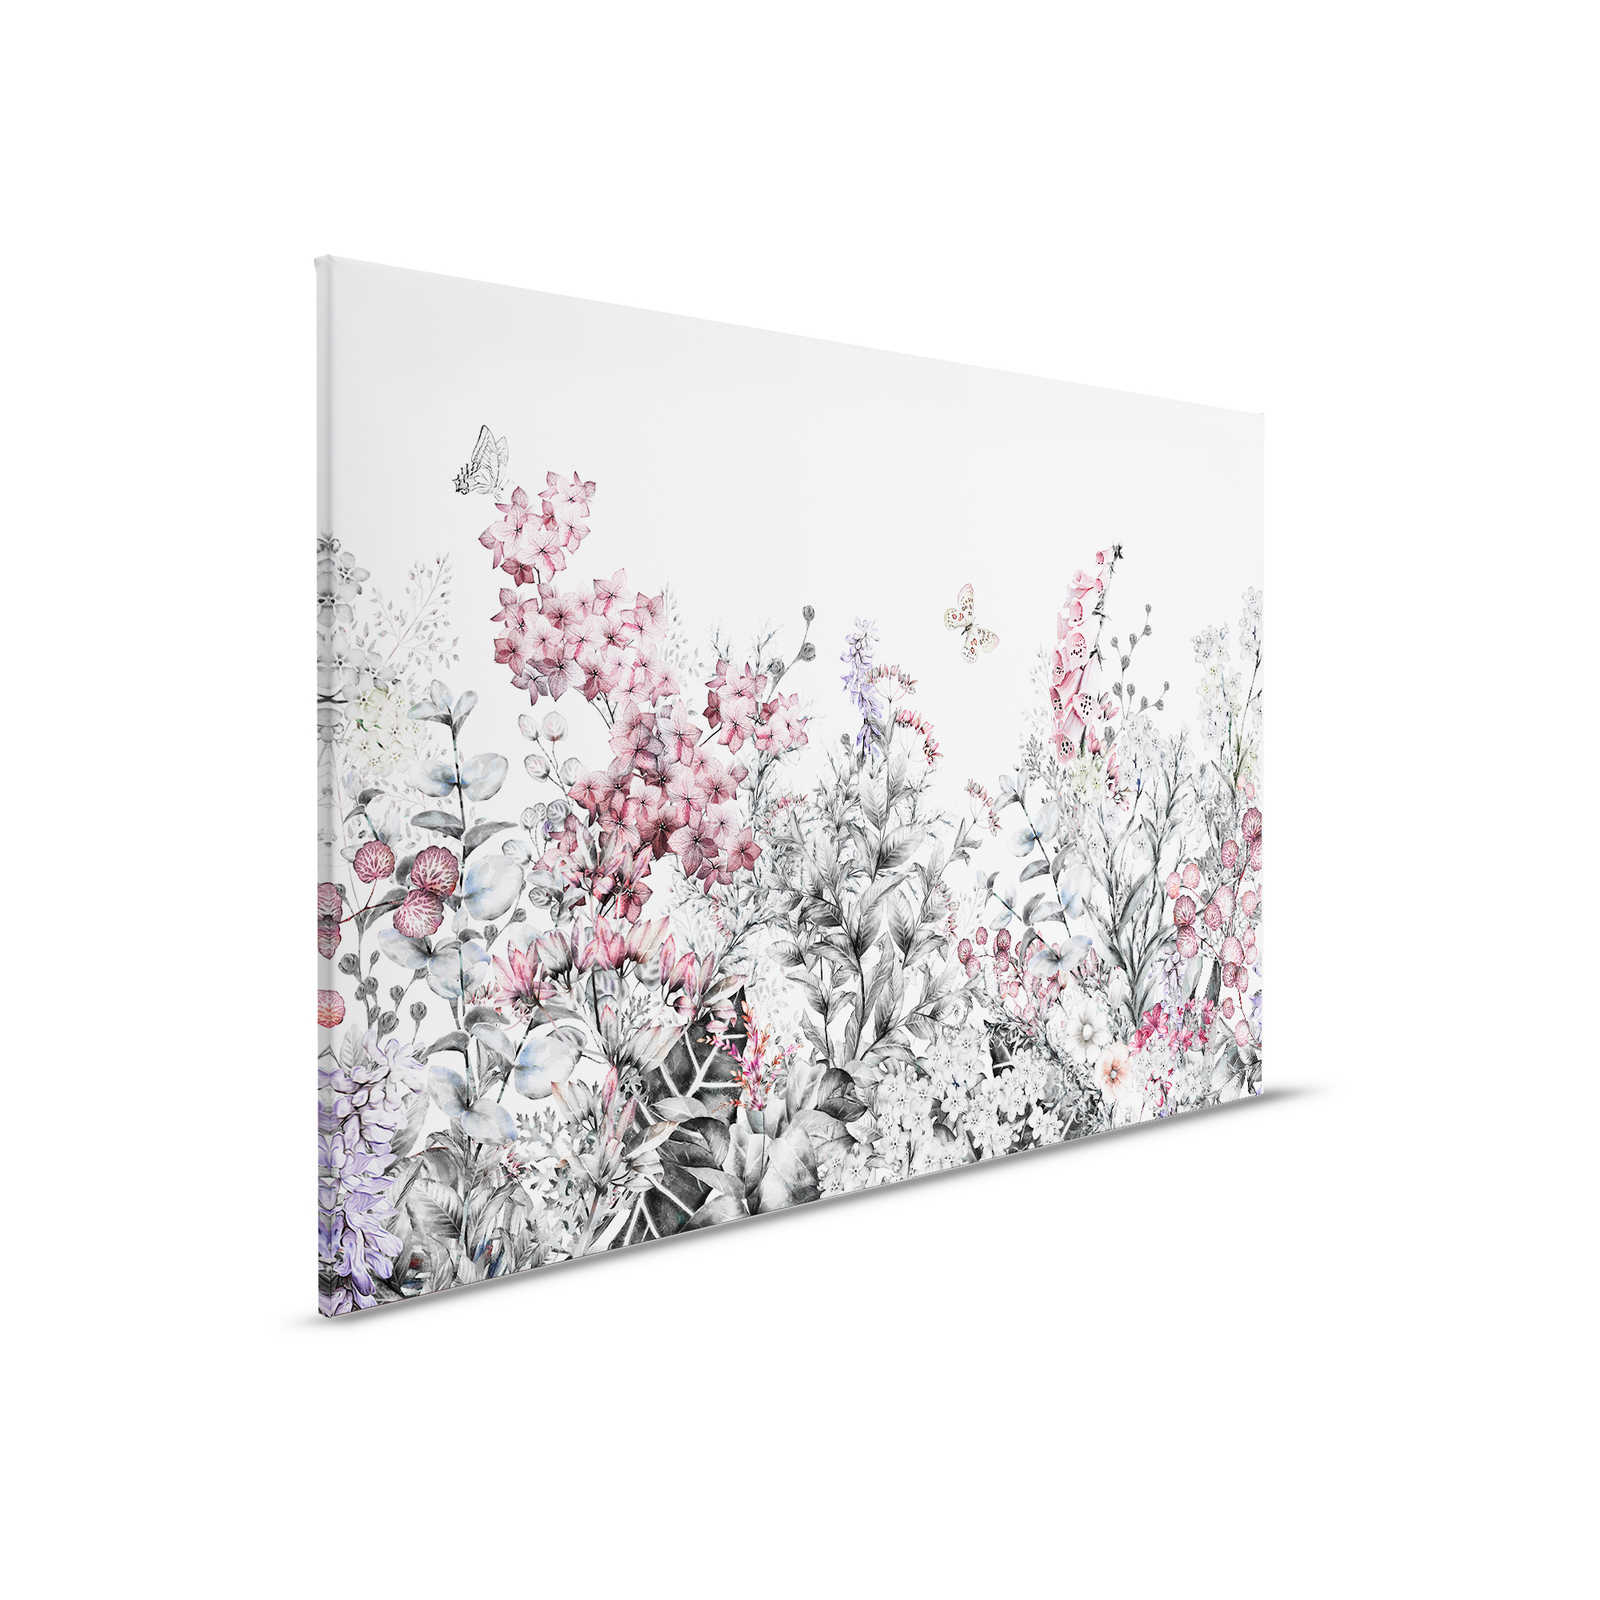         Canvas with Plain Painted Flowers - 0.90 m x 0.60 m
    